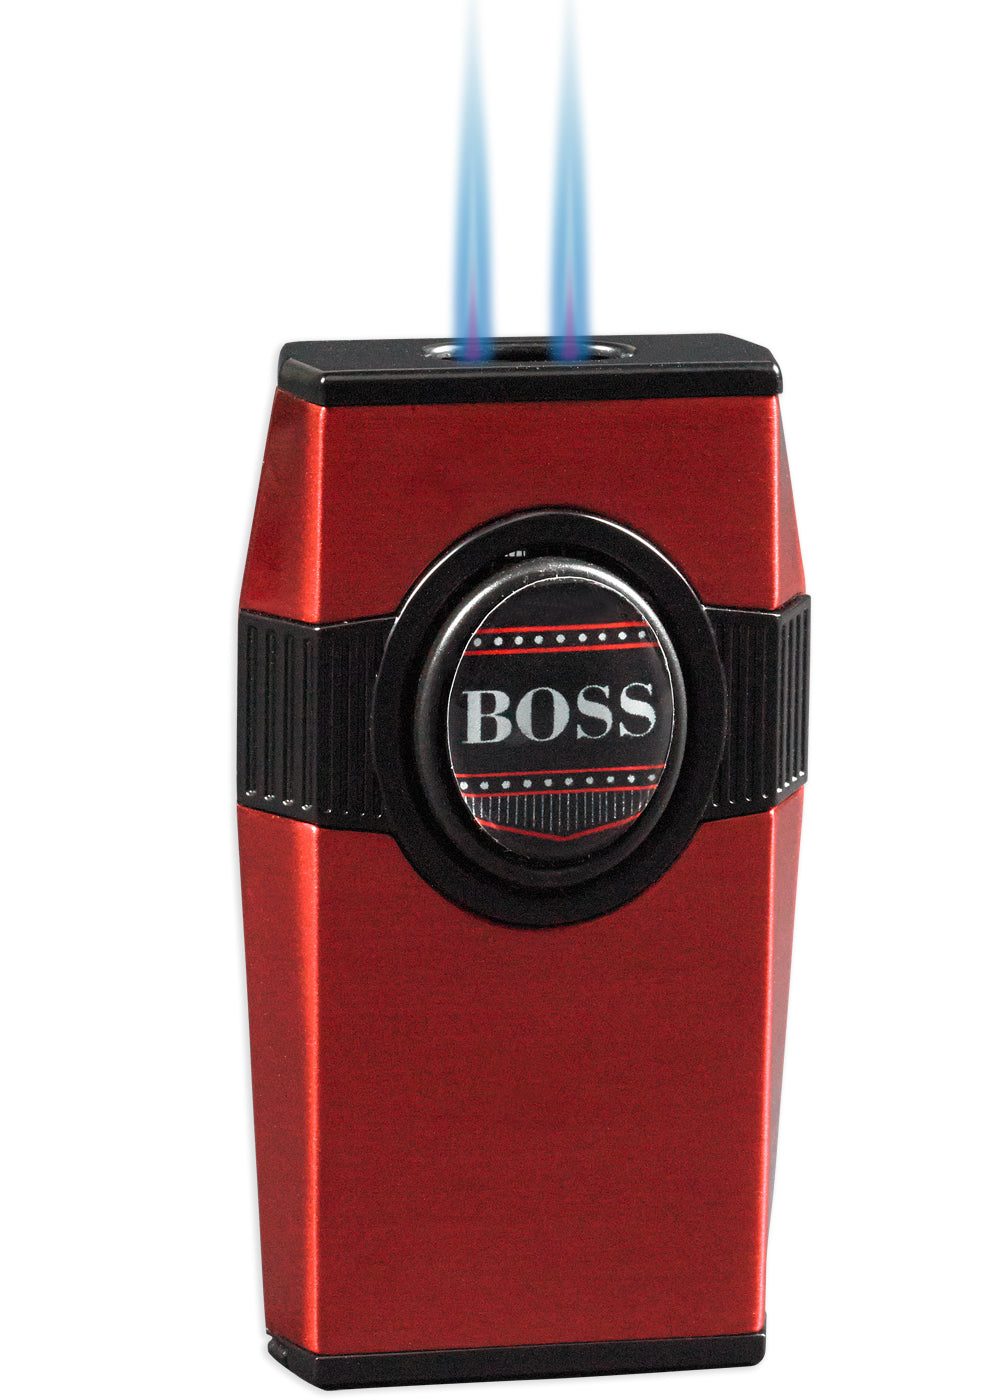 BOSS Twin Pinpoint Torch flame Lighter w/Punch - Red - Wine Cooler City